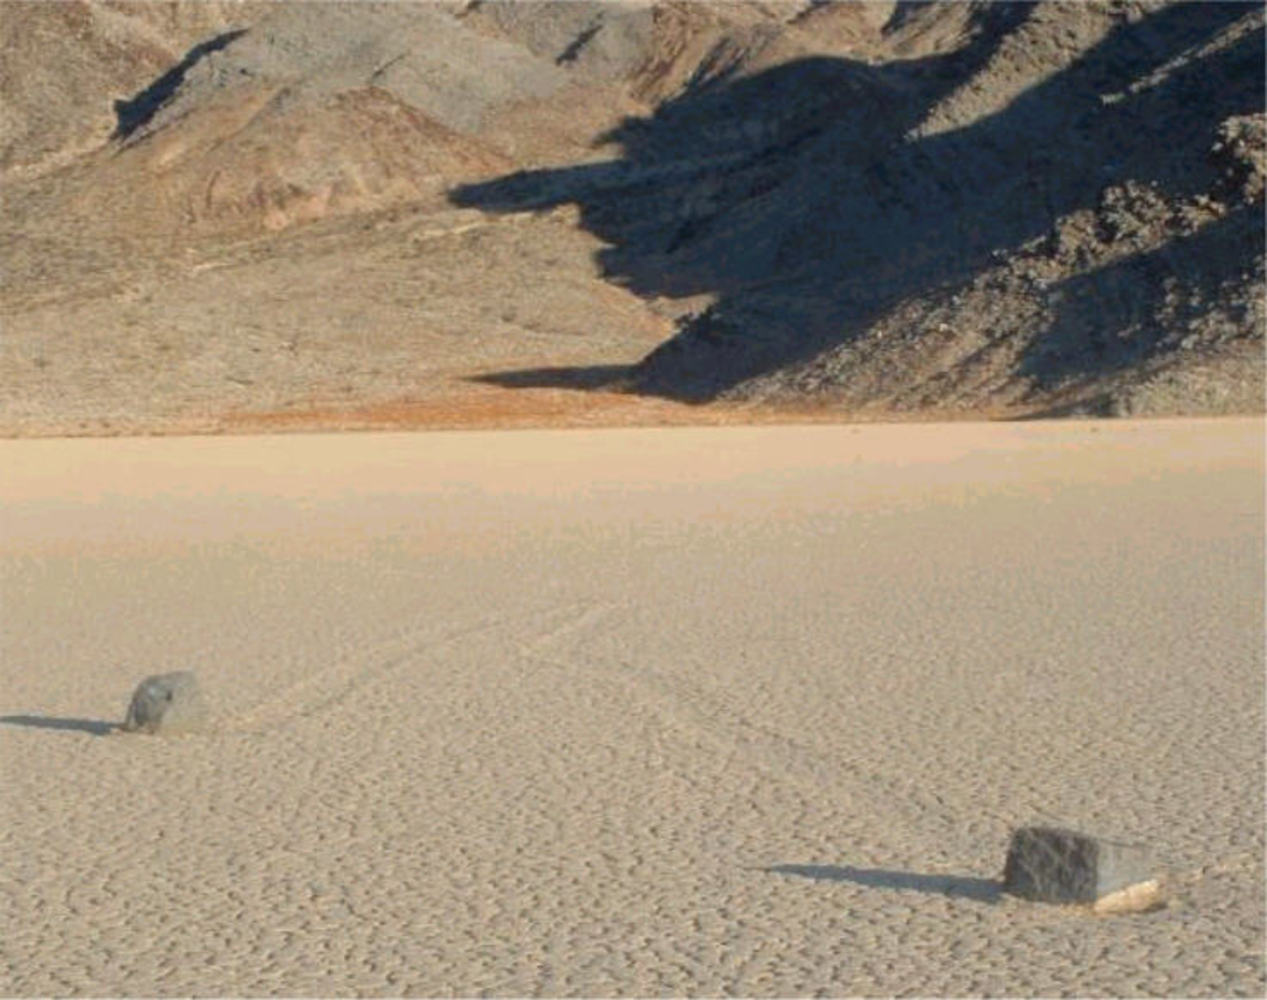 Picture of two rocks on Racetrack Playa in Death Valley. Notice the mysterious groves leading away from the stones.